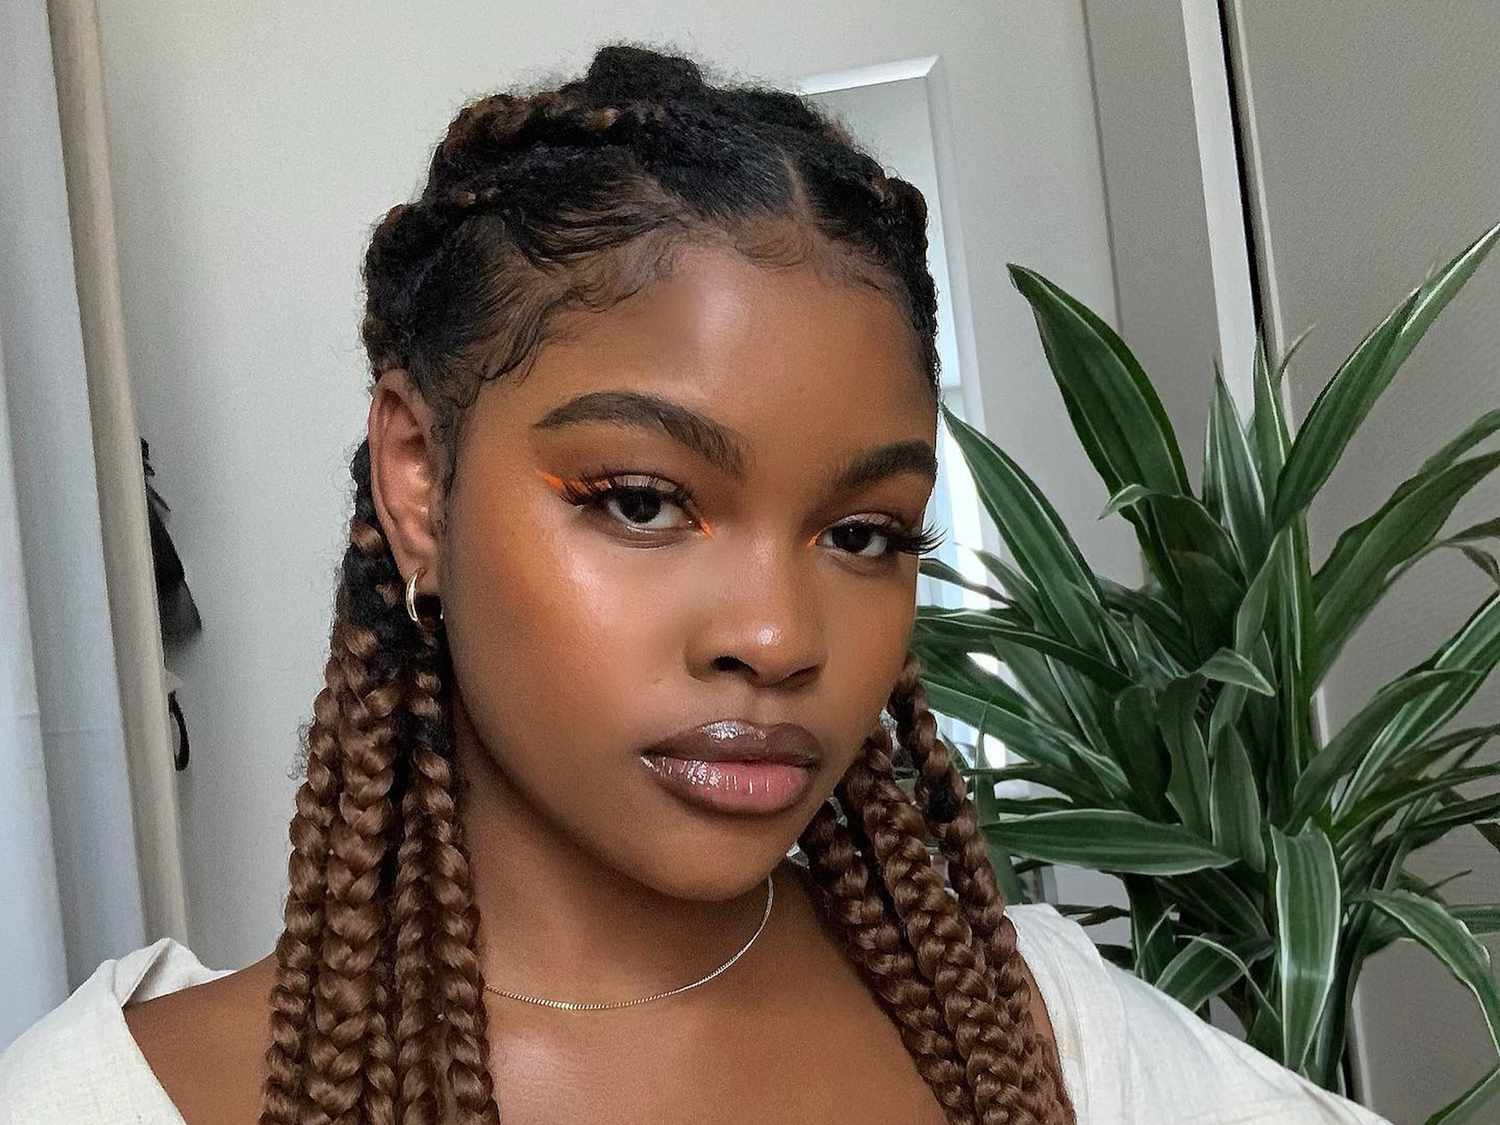 A woman with box braids pulled off her face in a half-up, half-down style